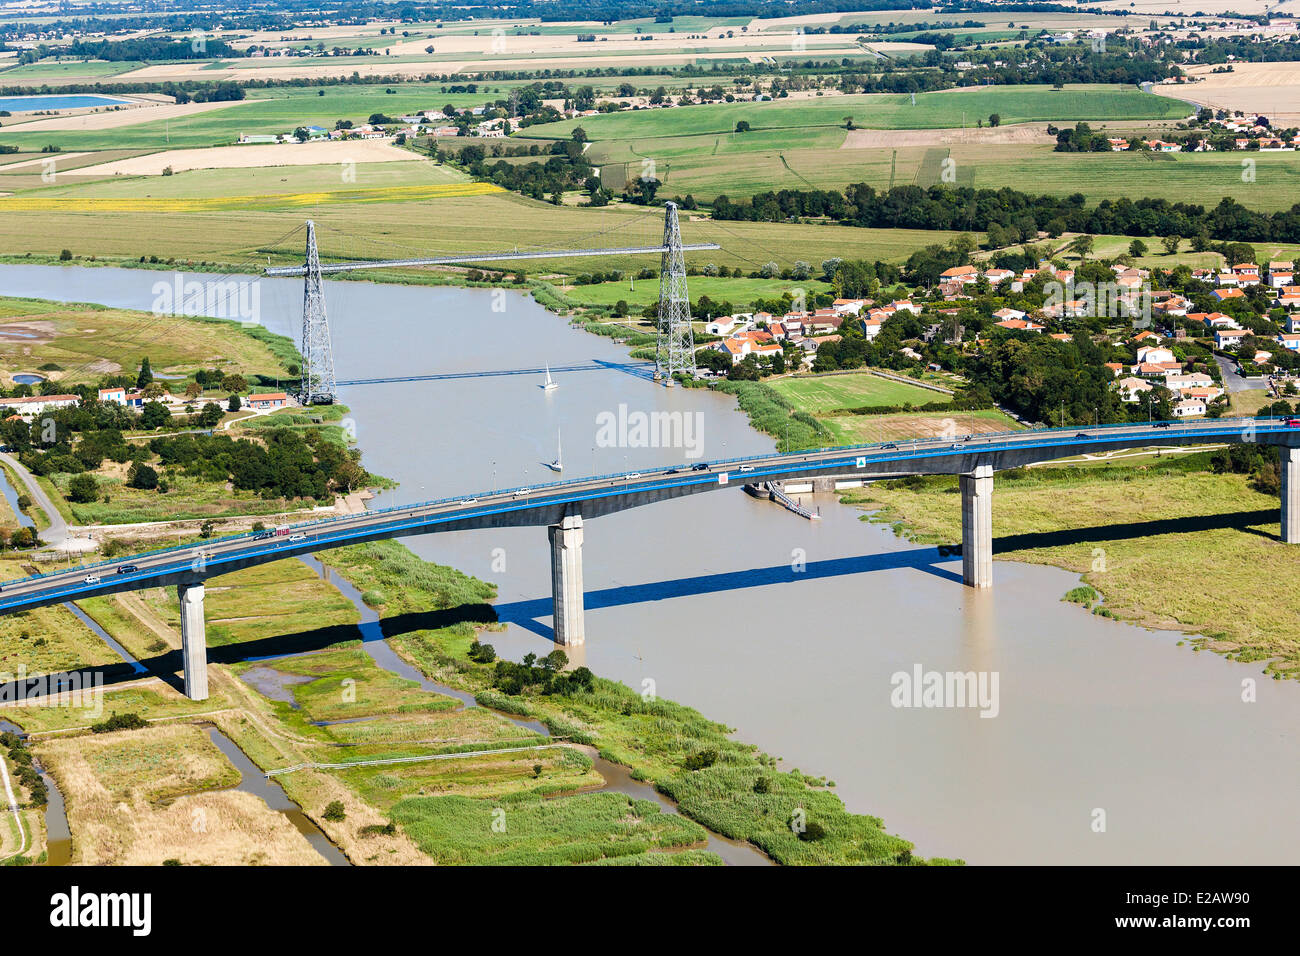 France, Charente Maritime, Rochefort (aerial view) Stock Photo